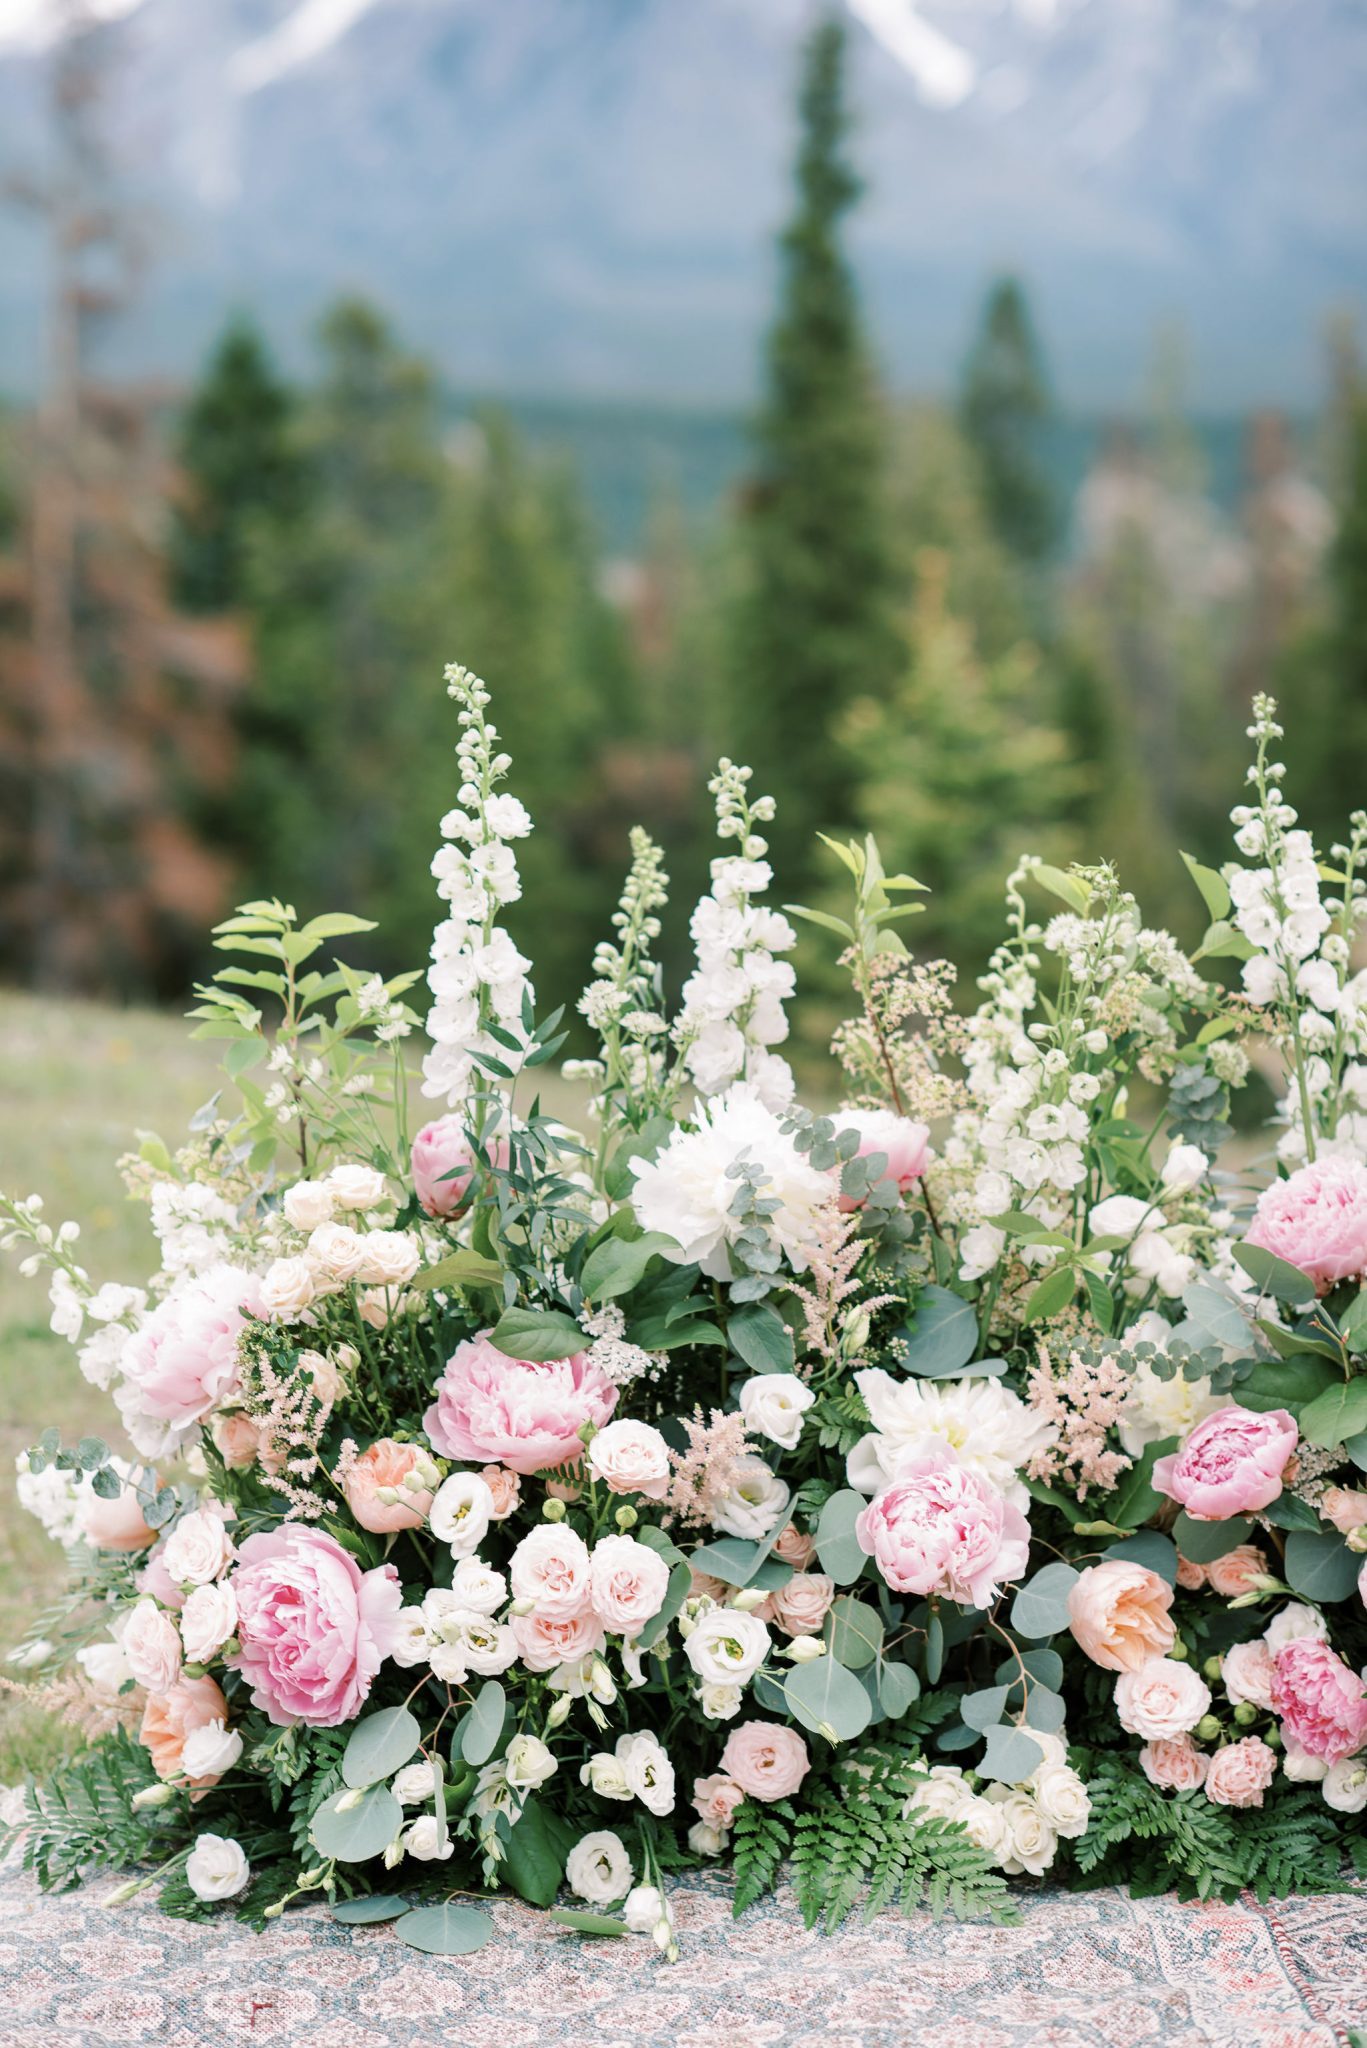 Grounded floral arch featuring white and pink blooms by Flowers by Janie for this Banff National Park elopement